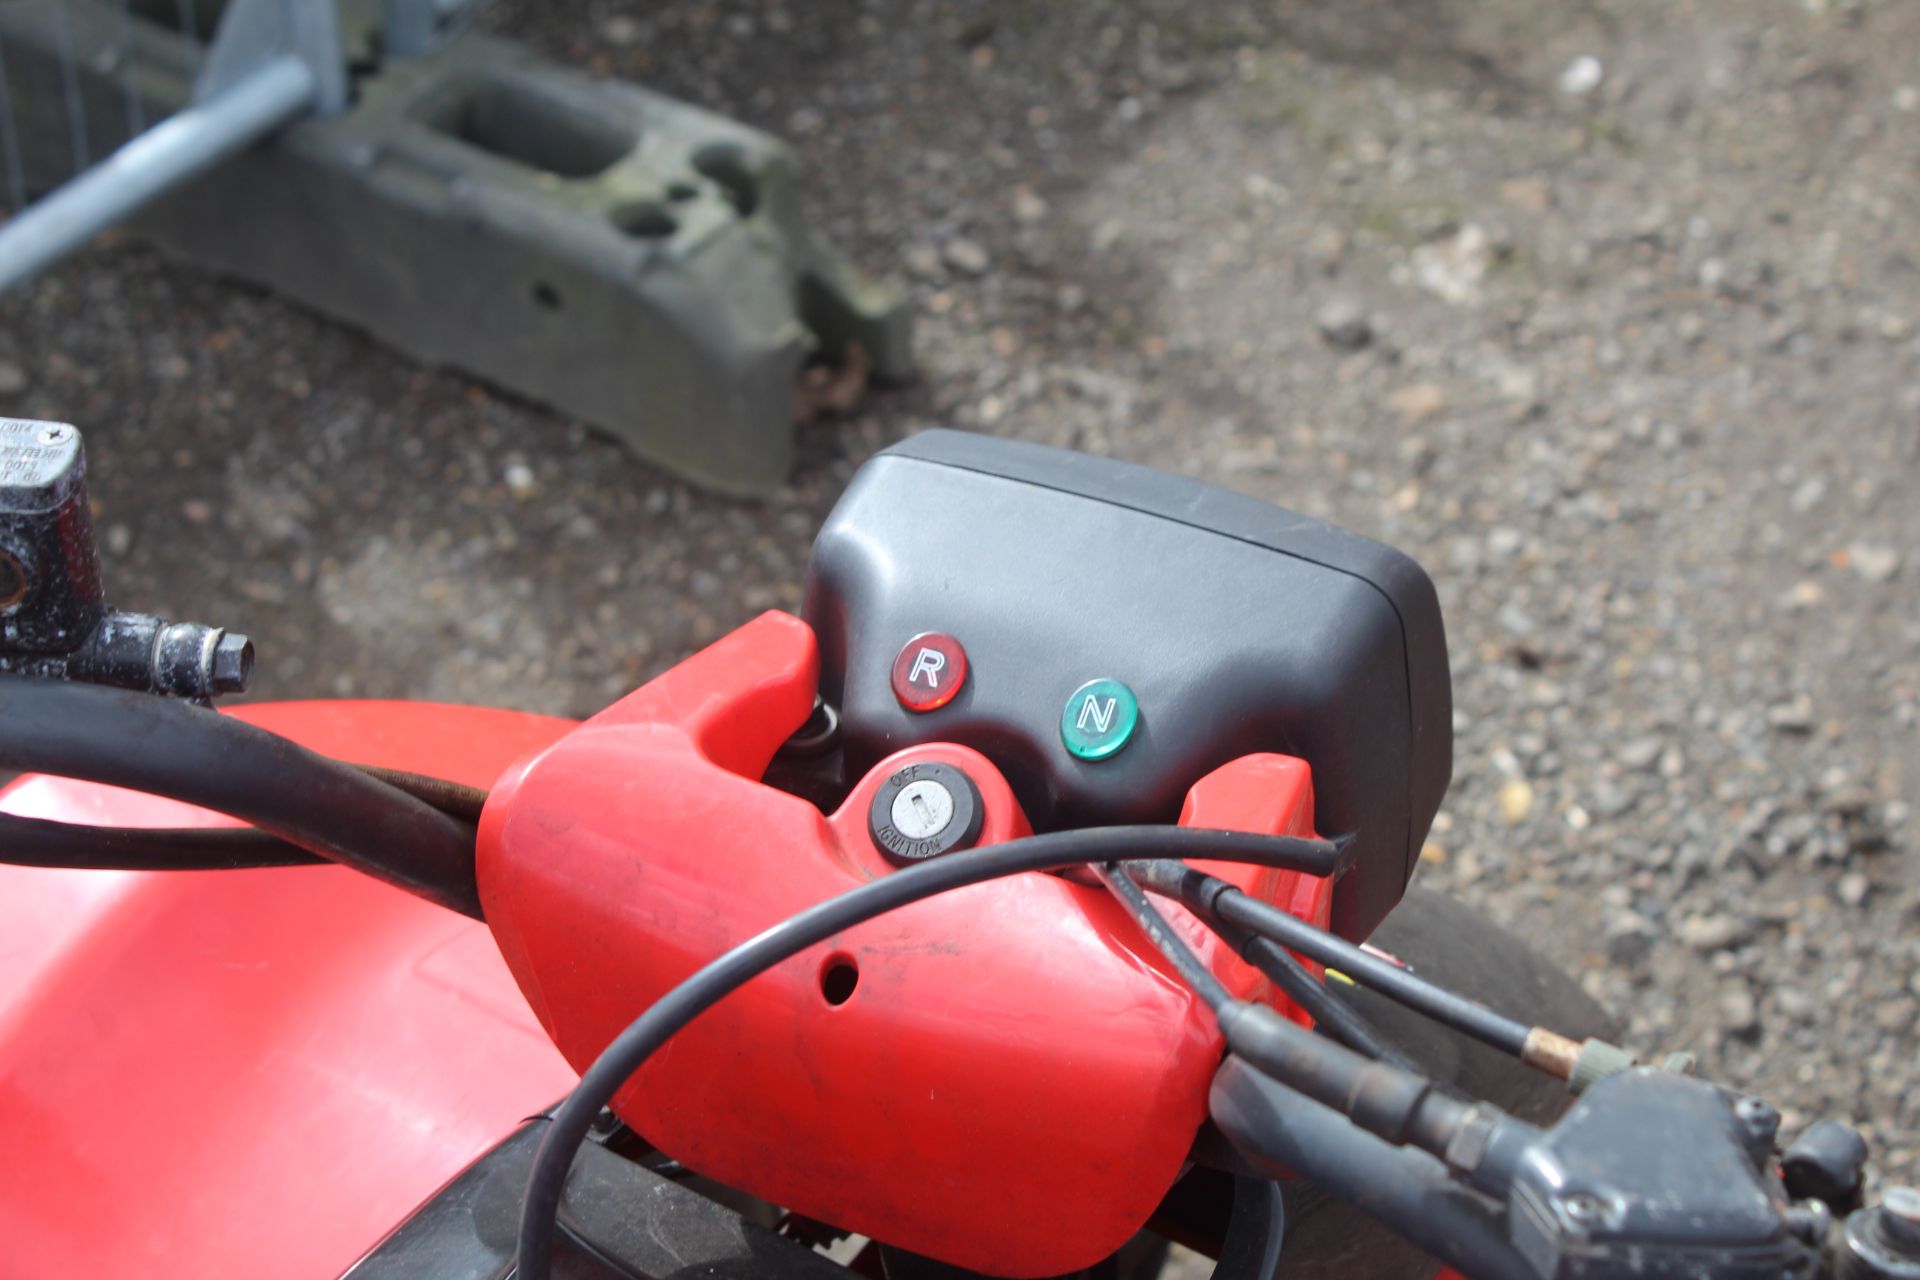 Kymco MX'er 150cc off road ATV. 2004. owned from new. Key, Manual held. - Image 8 of 18